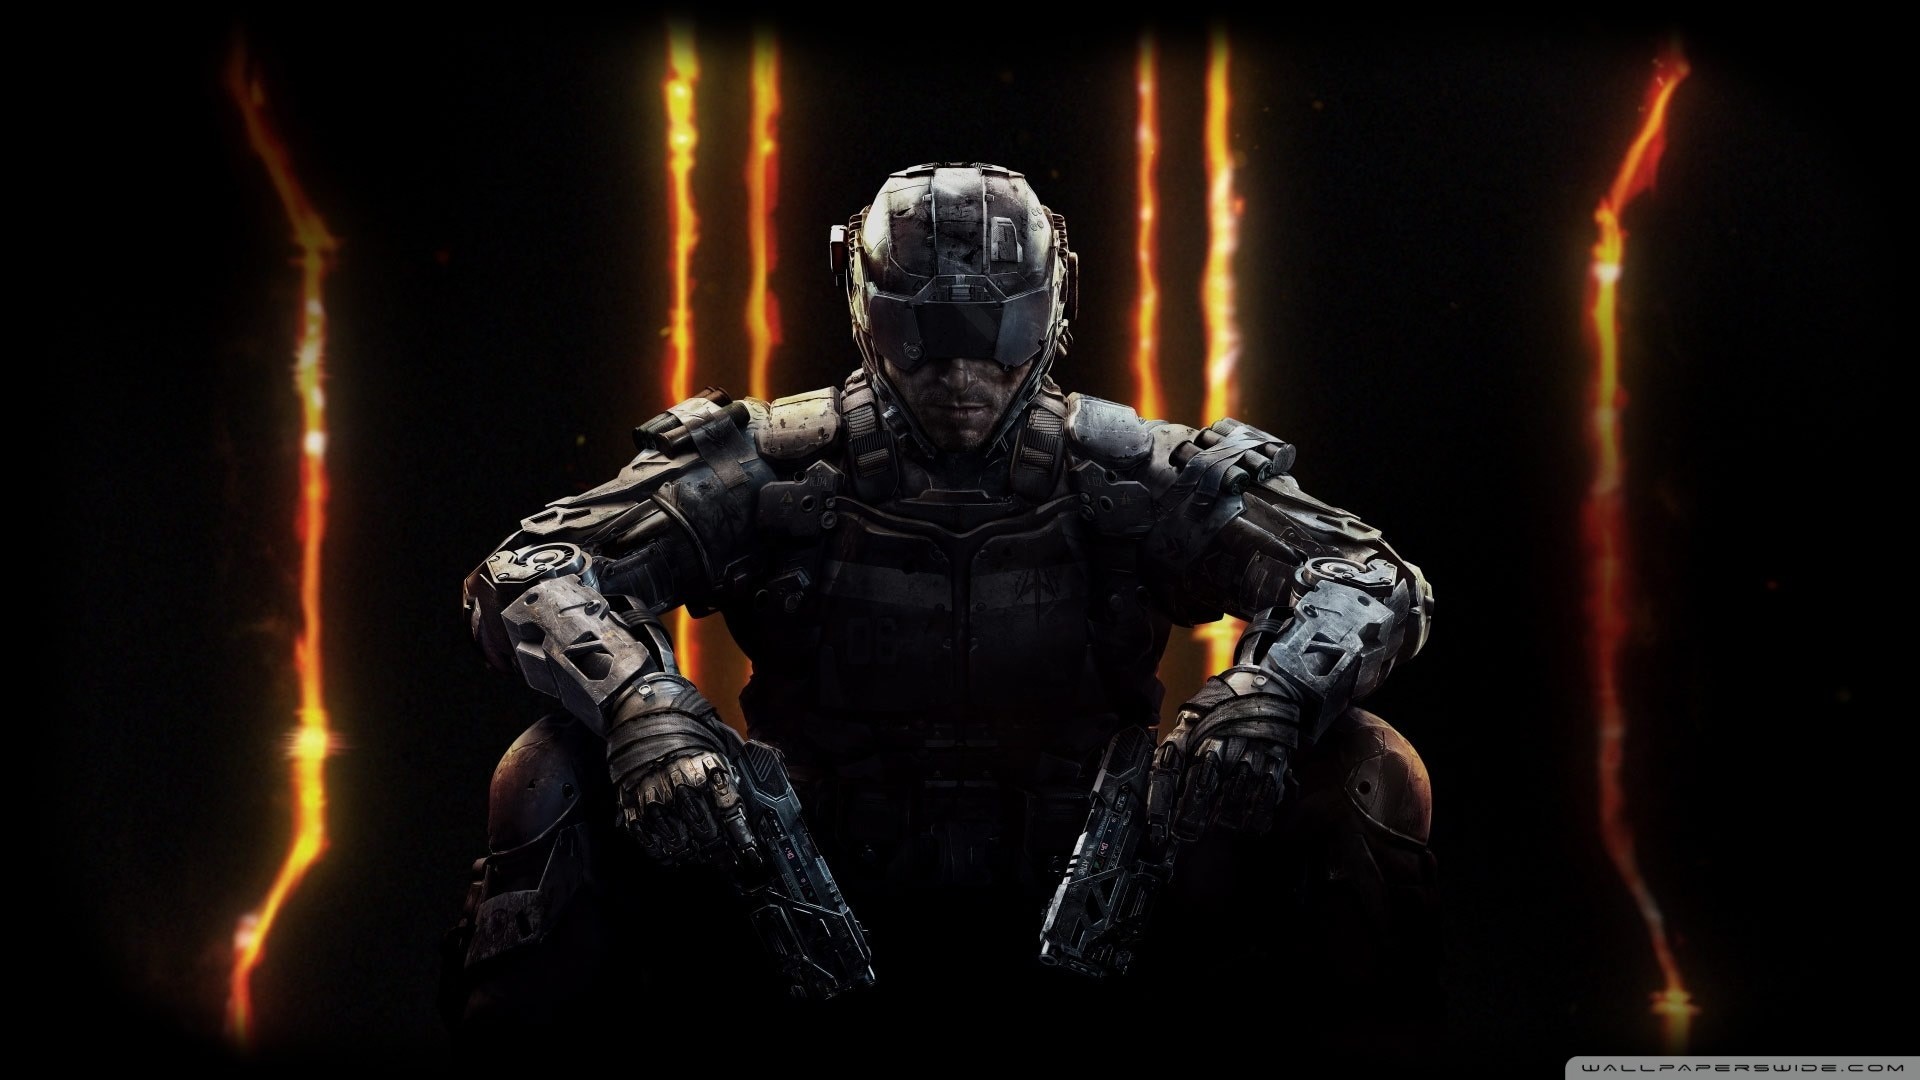 1920x1080 Call of Duty Black Ops 3 HD Wide Wallpaper for Widescreen